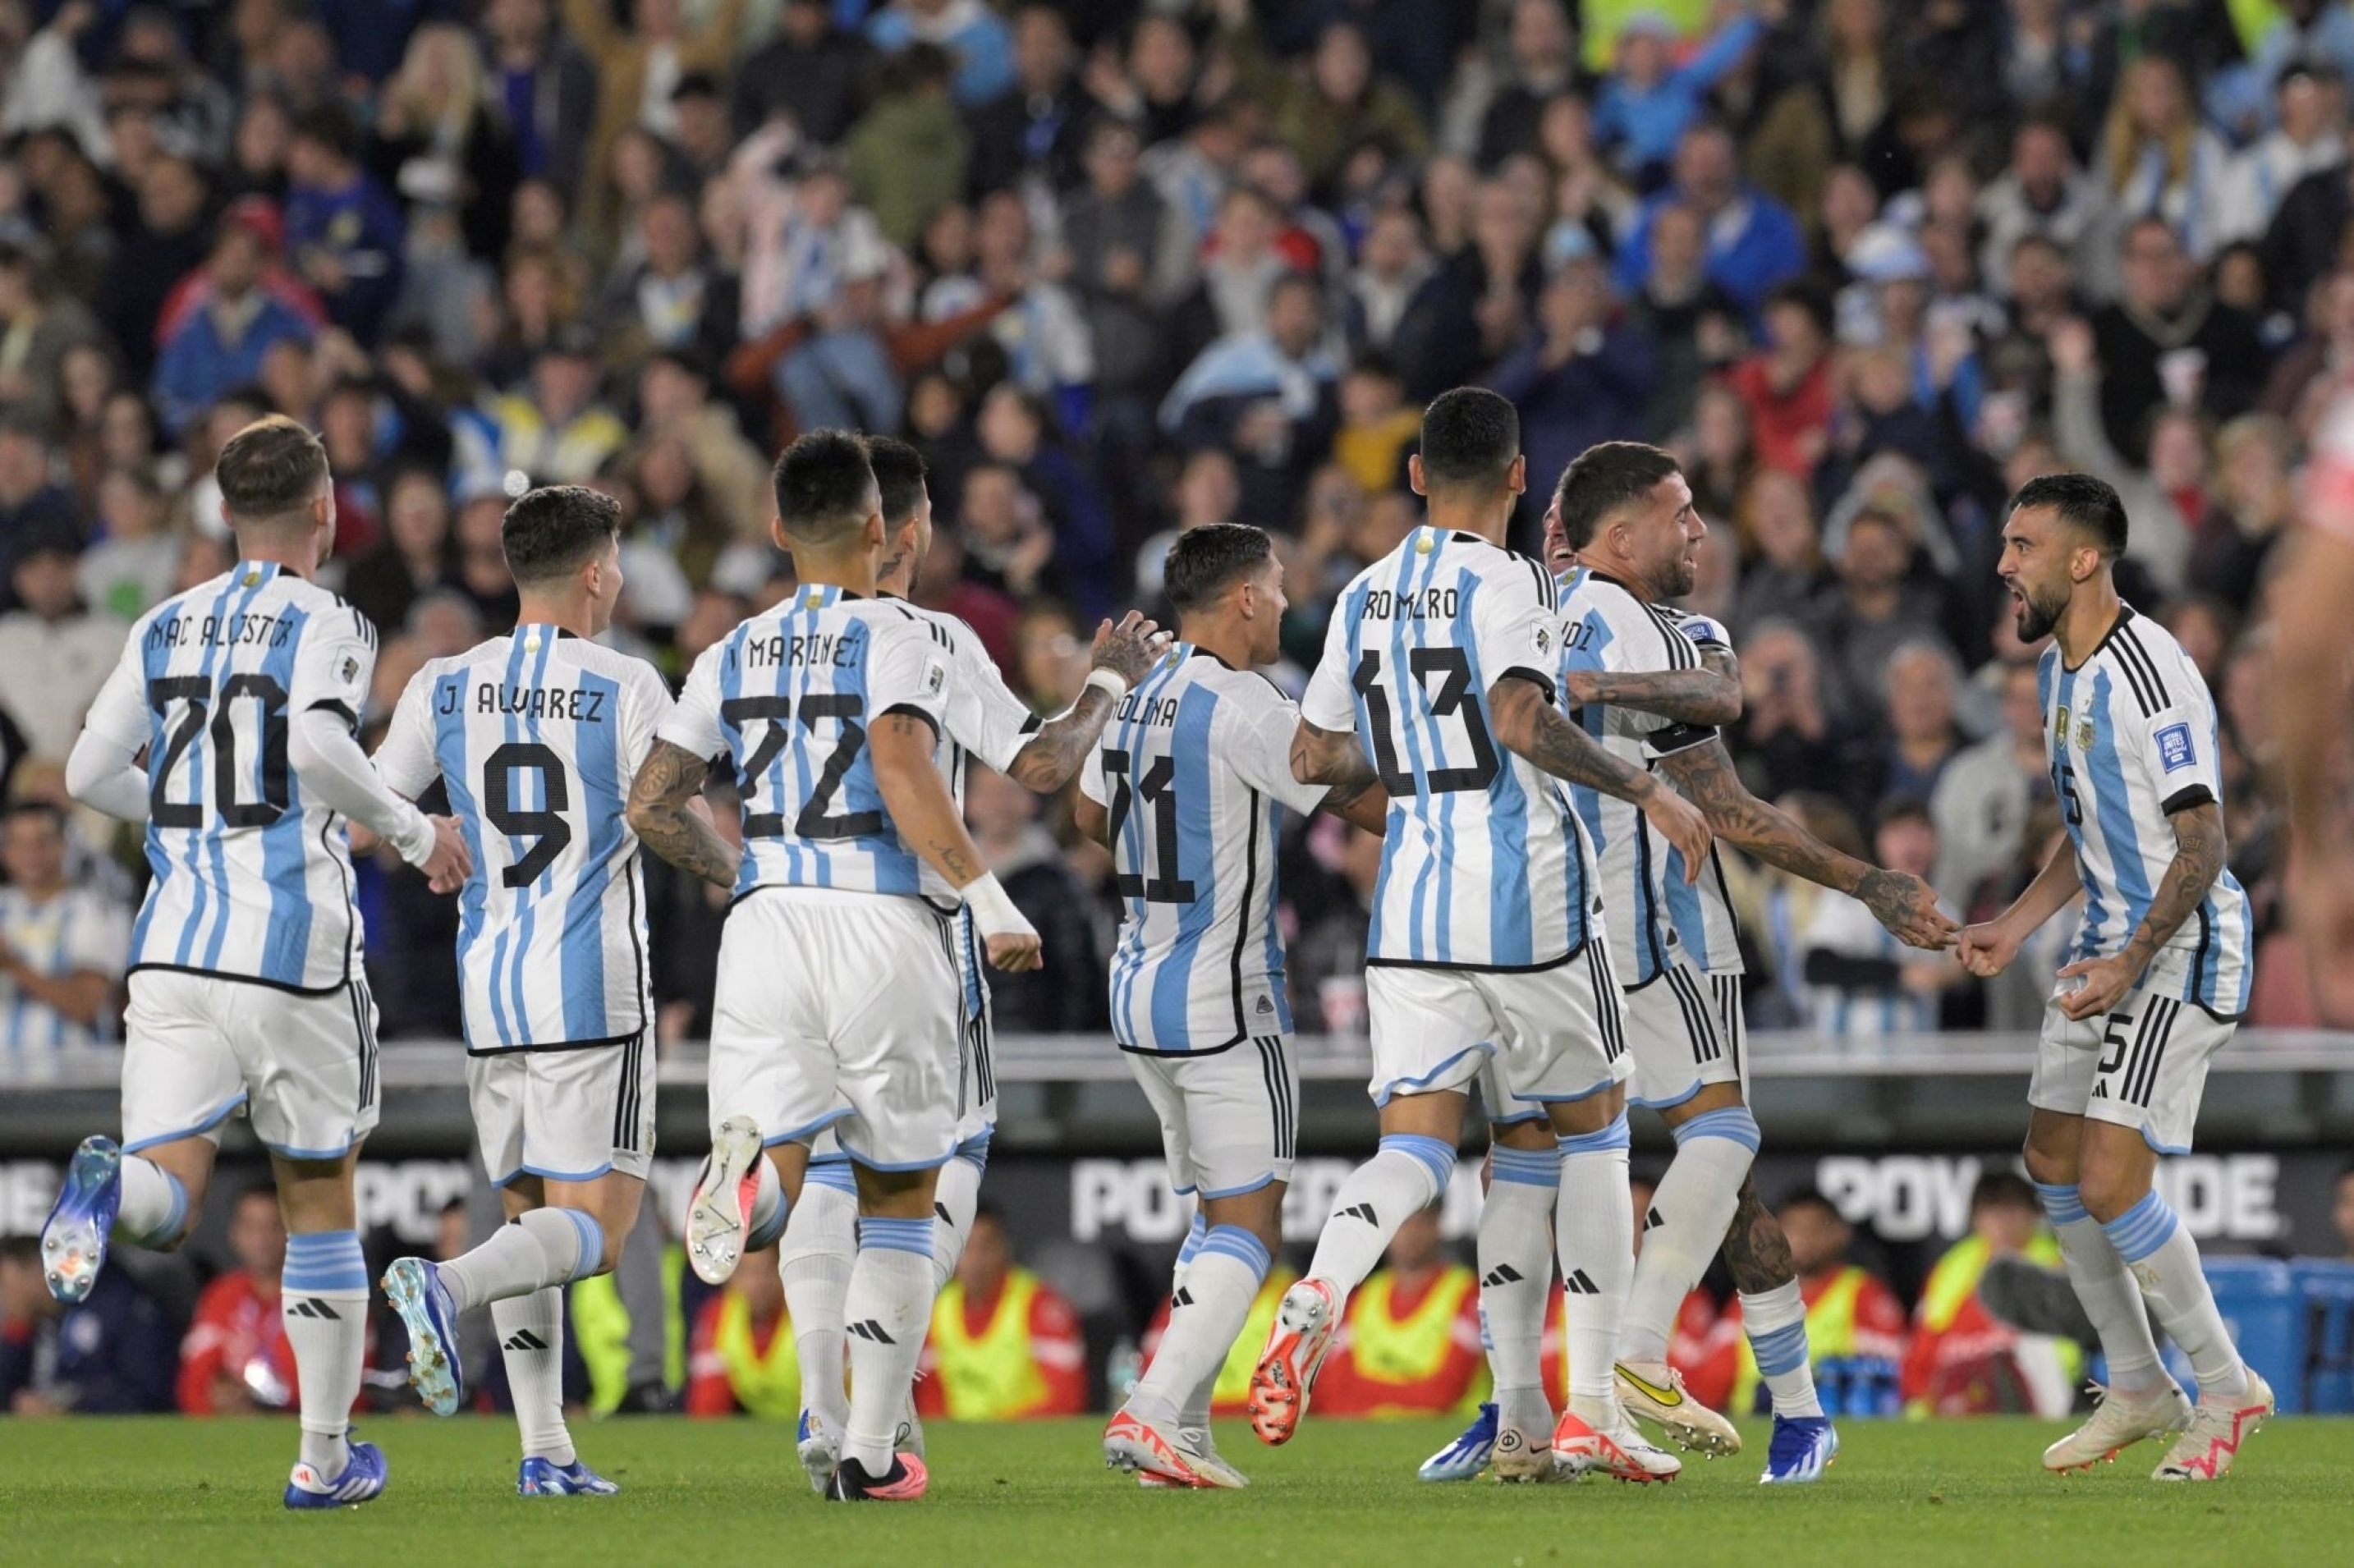 Argentina vs Uruguay - ARG vs URU - Las Albicelestes will be determined to extend 4-game 100% winning run in World Cup Qualifiers matches